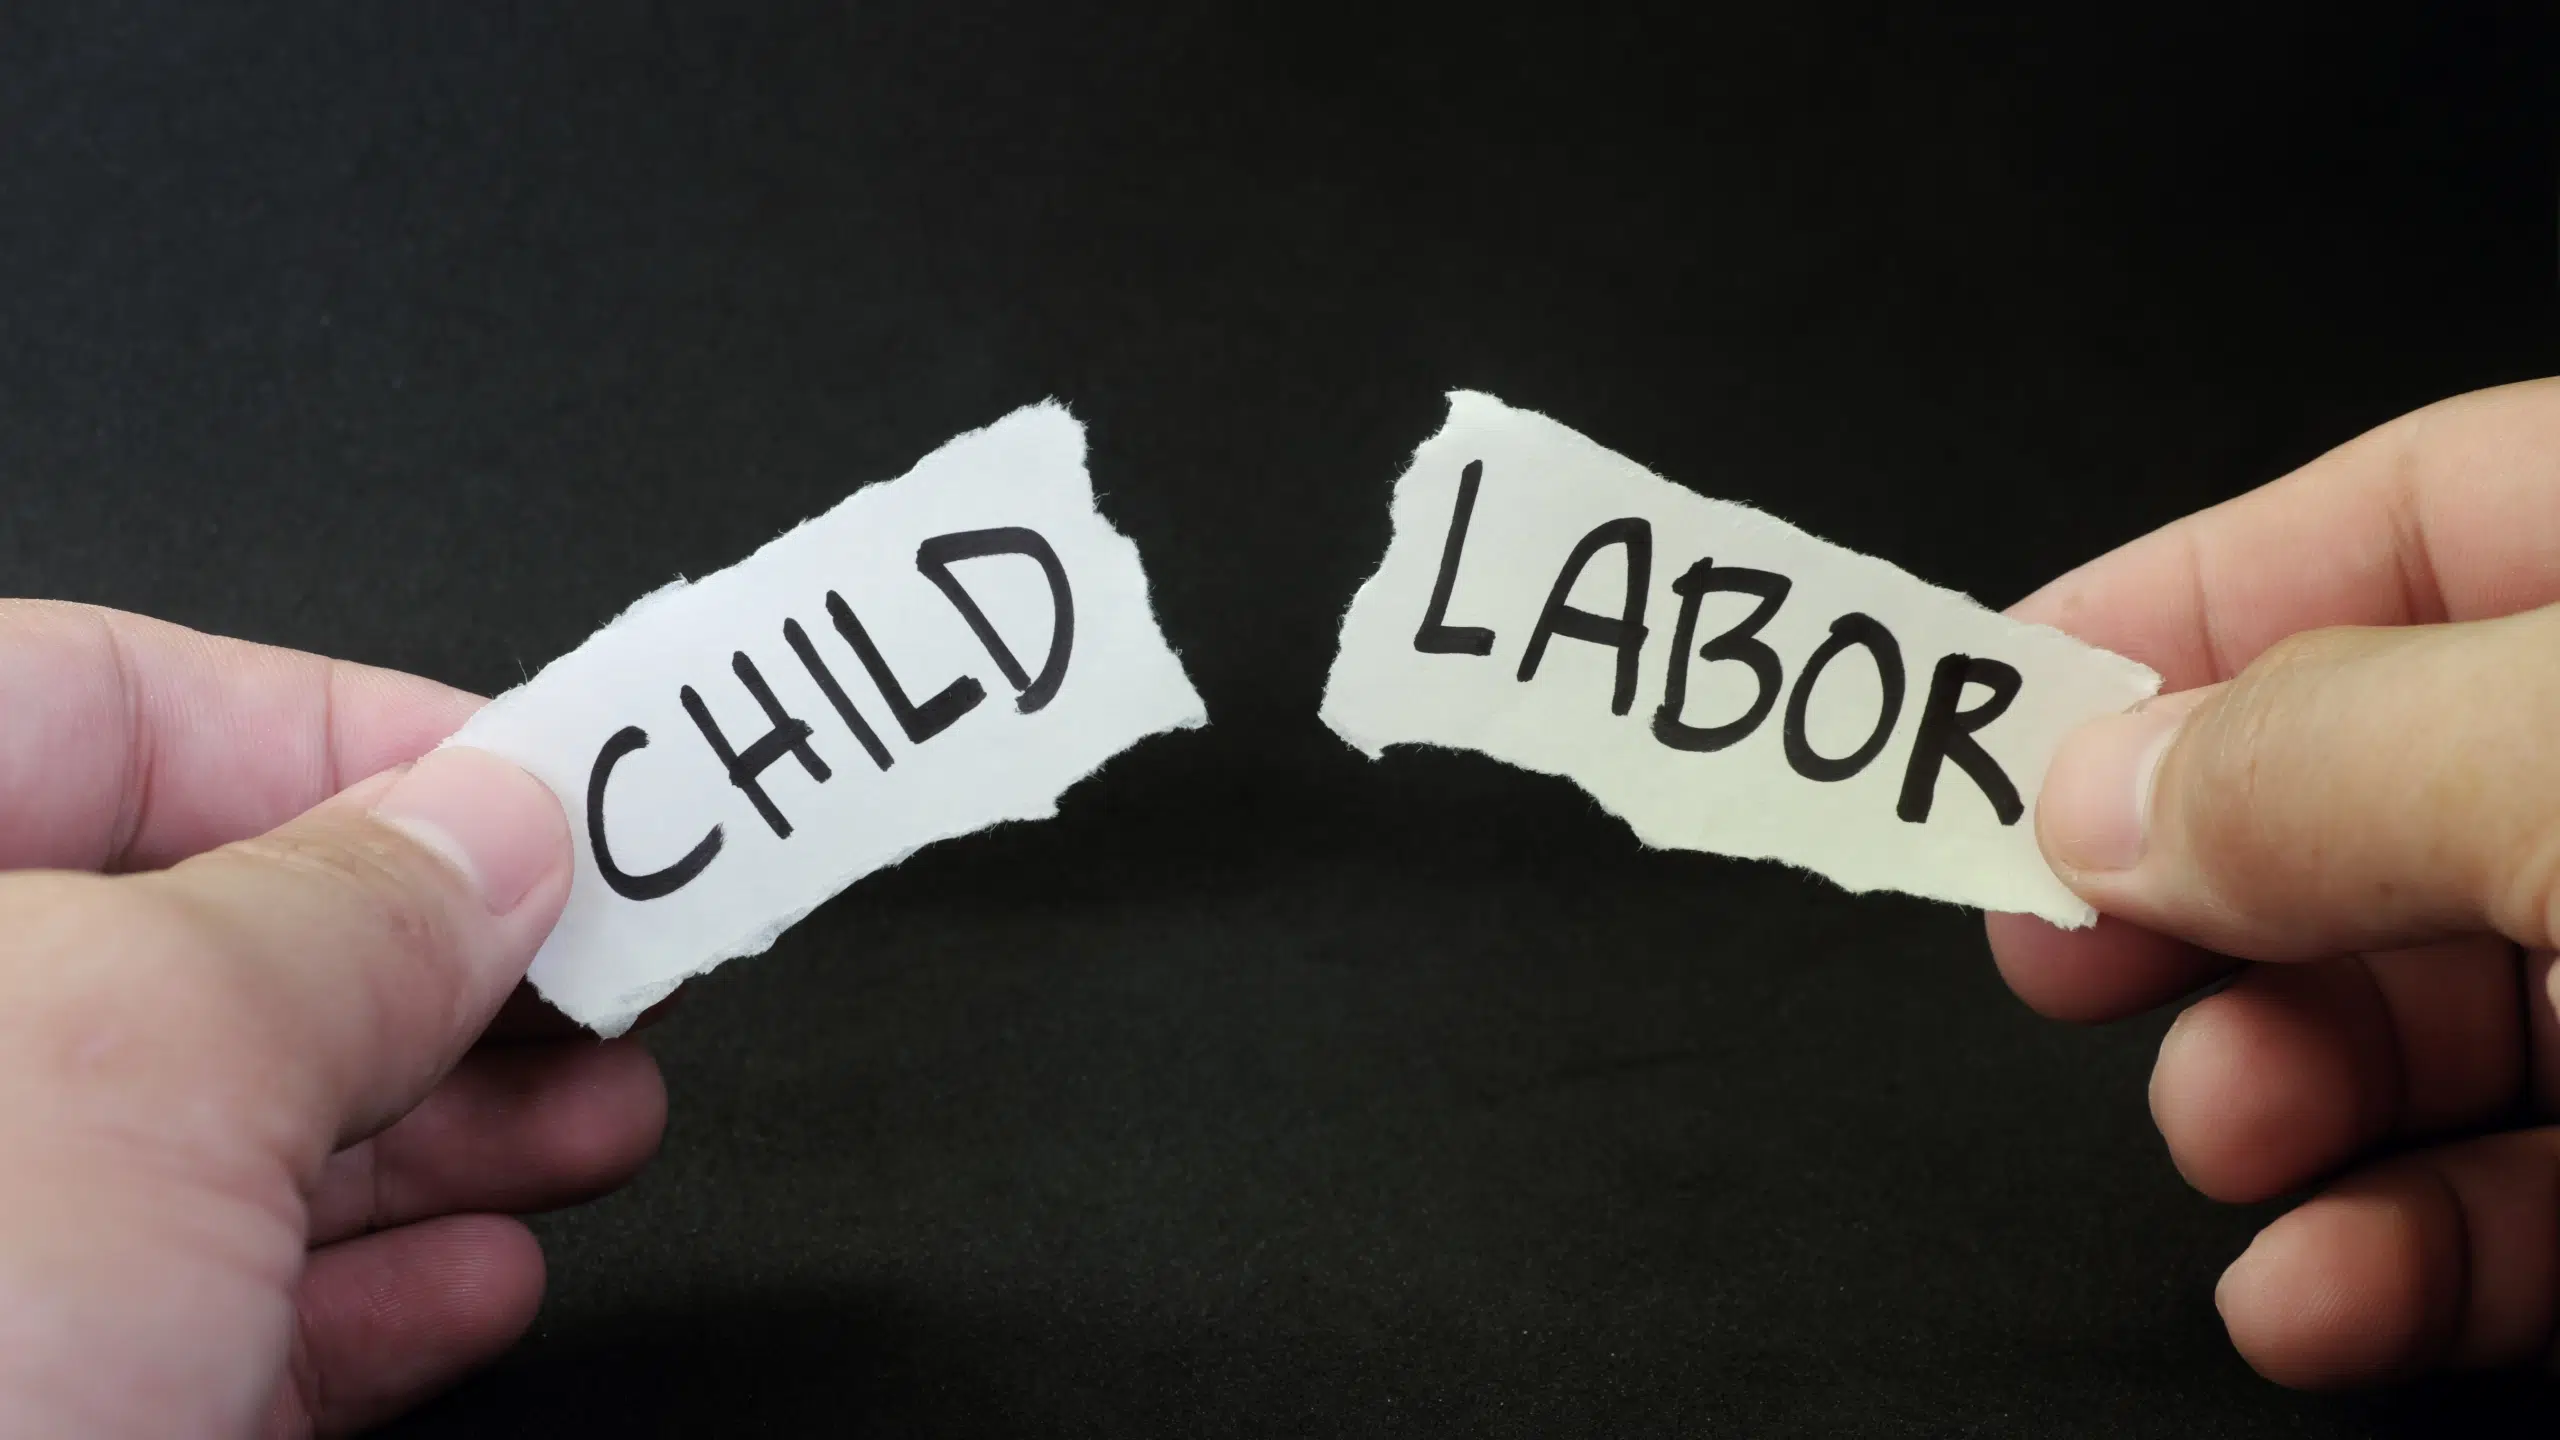 Child Labor Laws are Not Meant to Be Broken